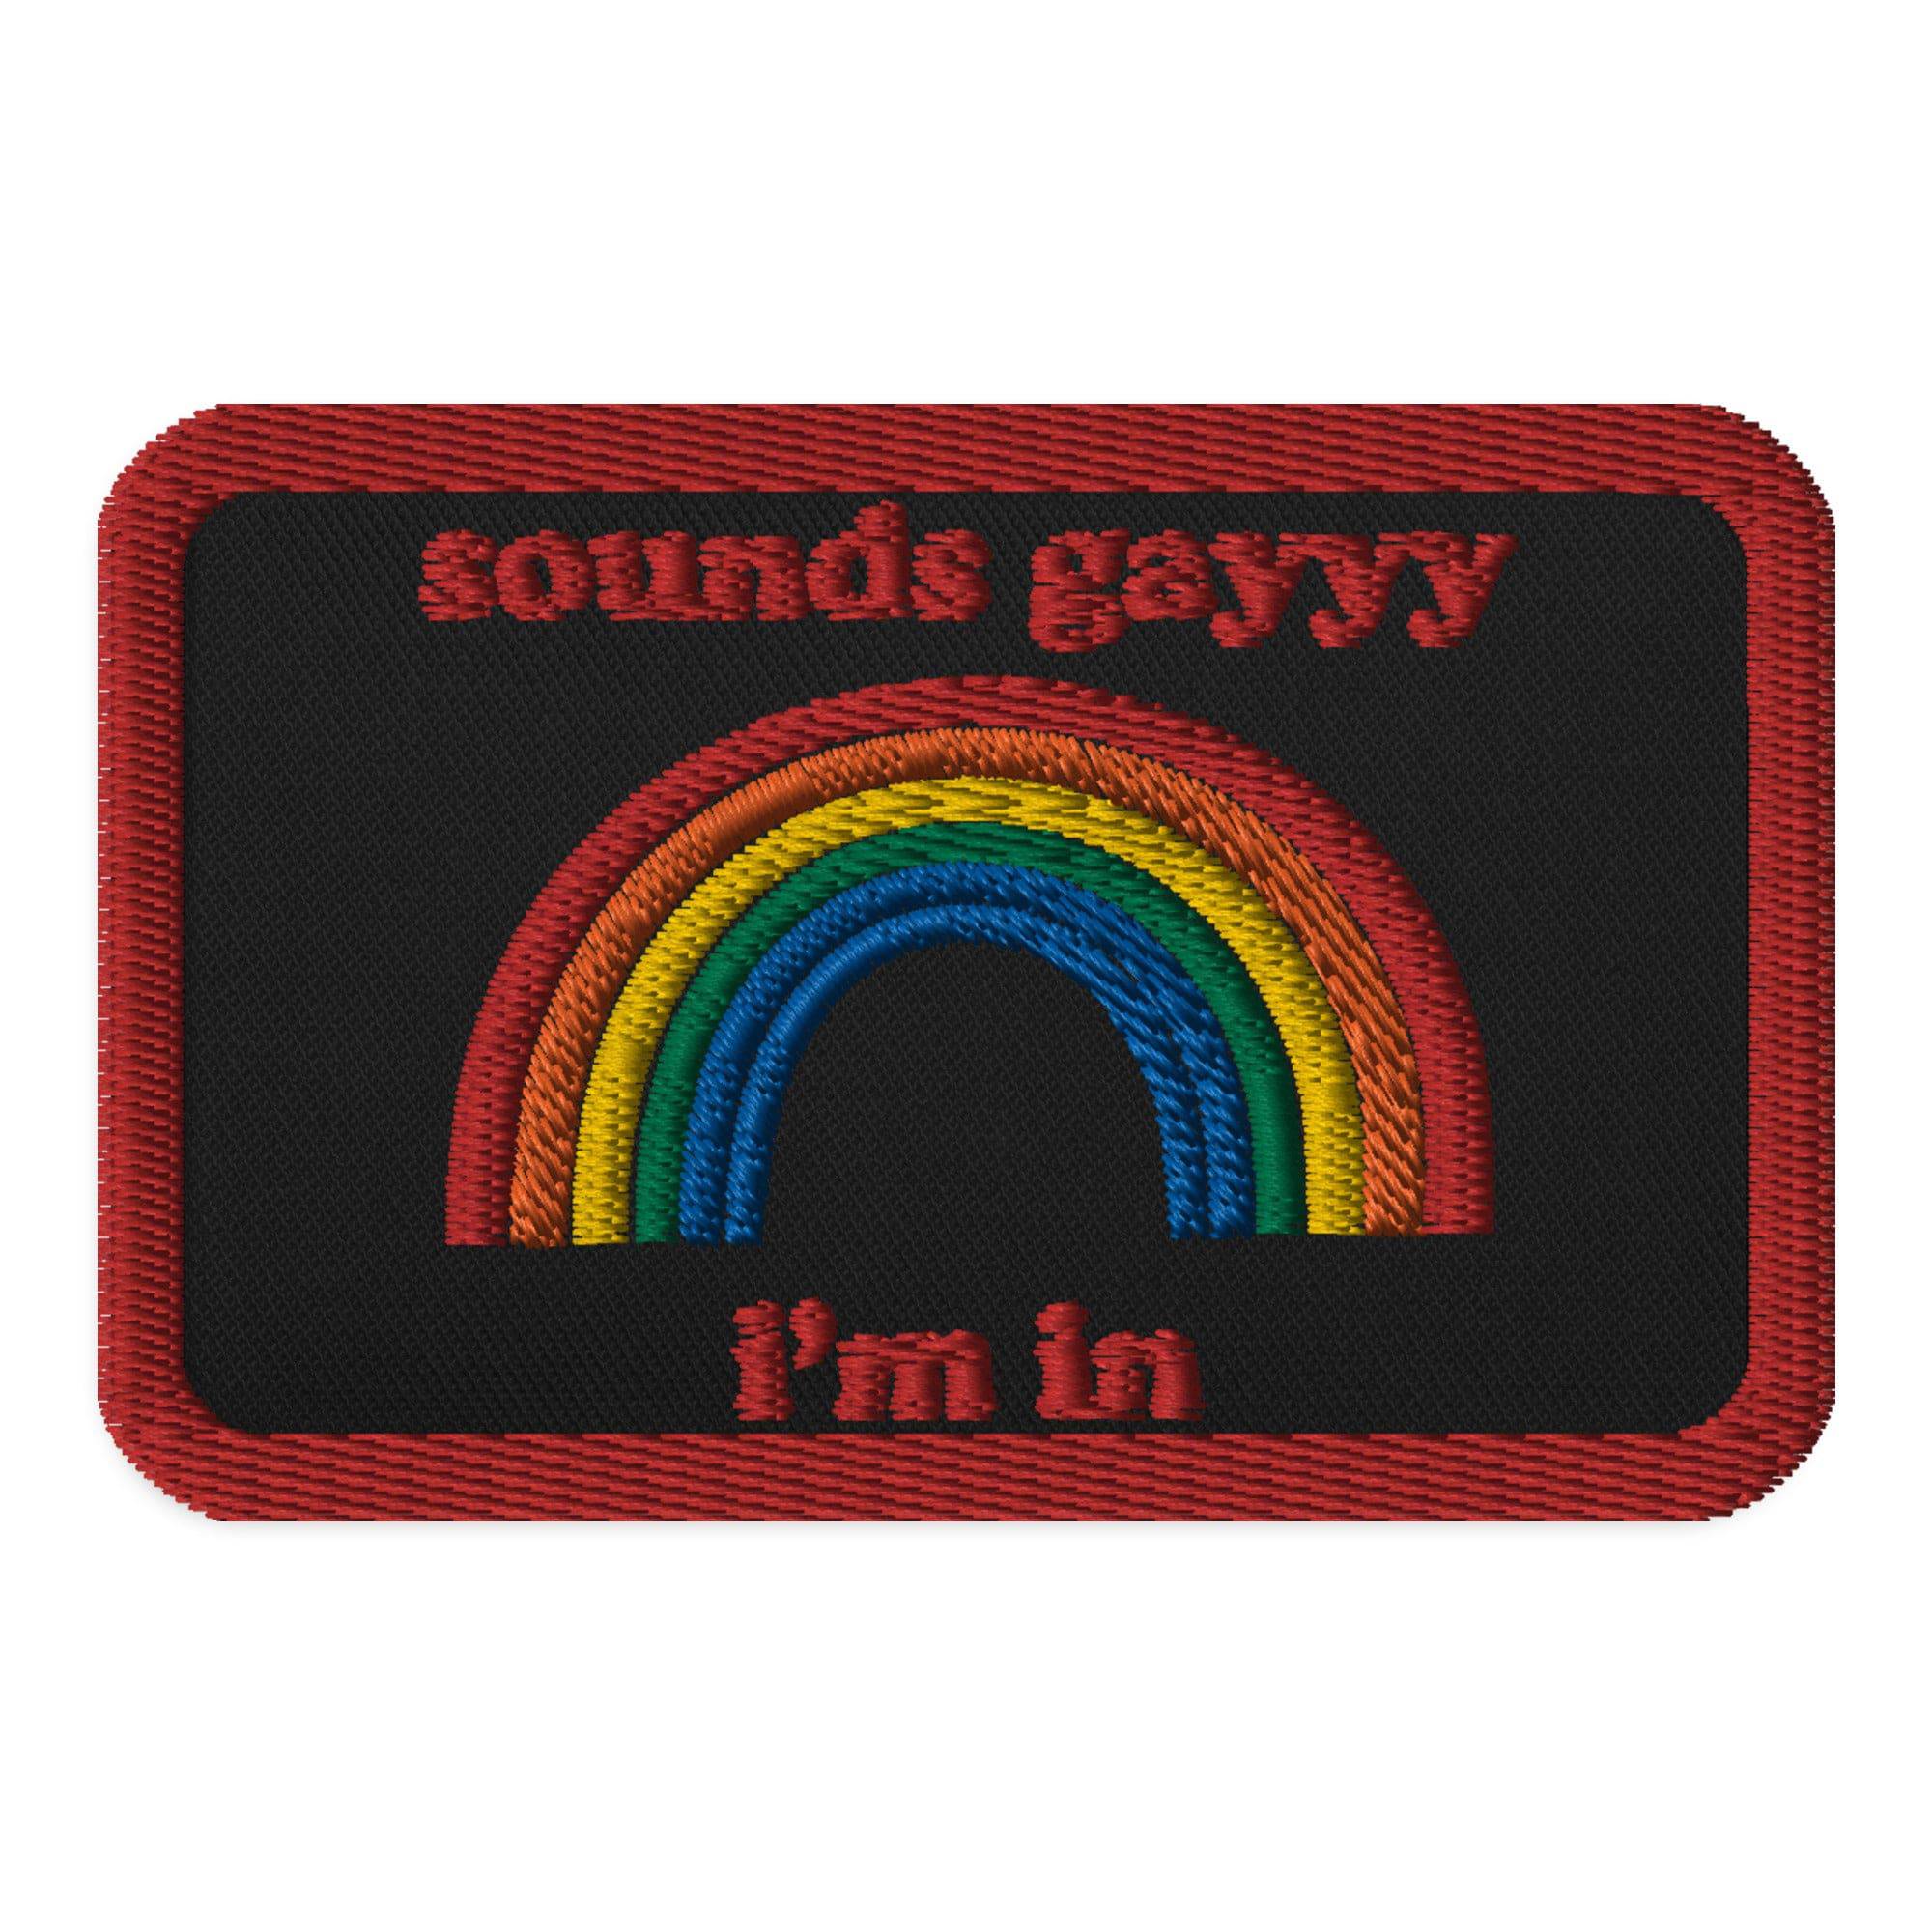 Sounds Gay I'm In Embroidered patch